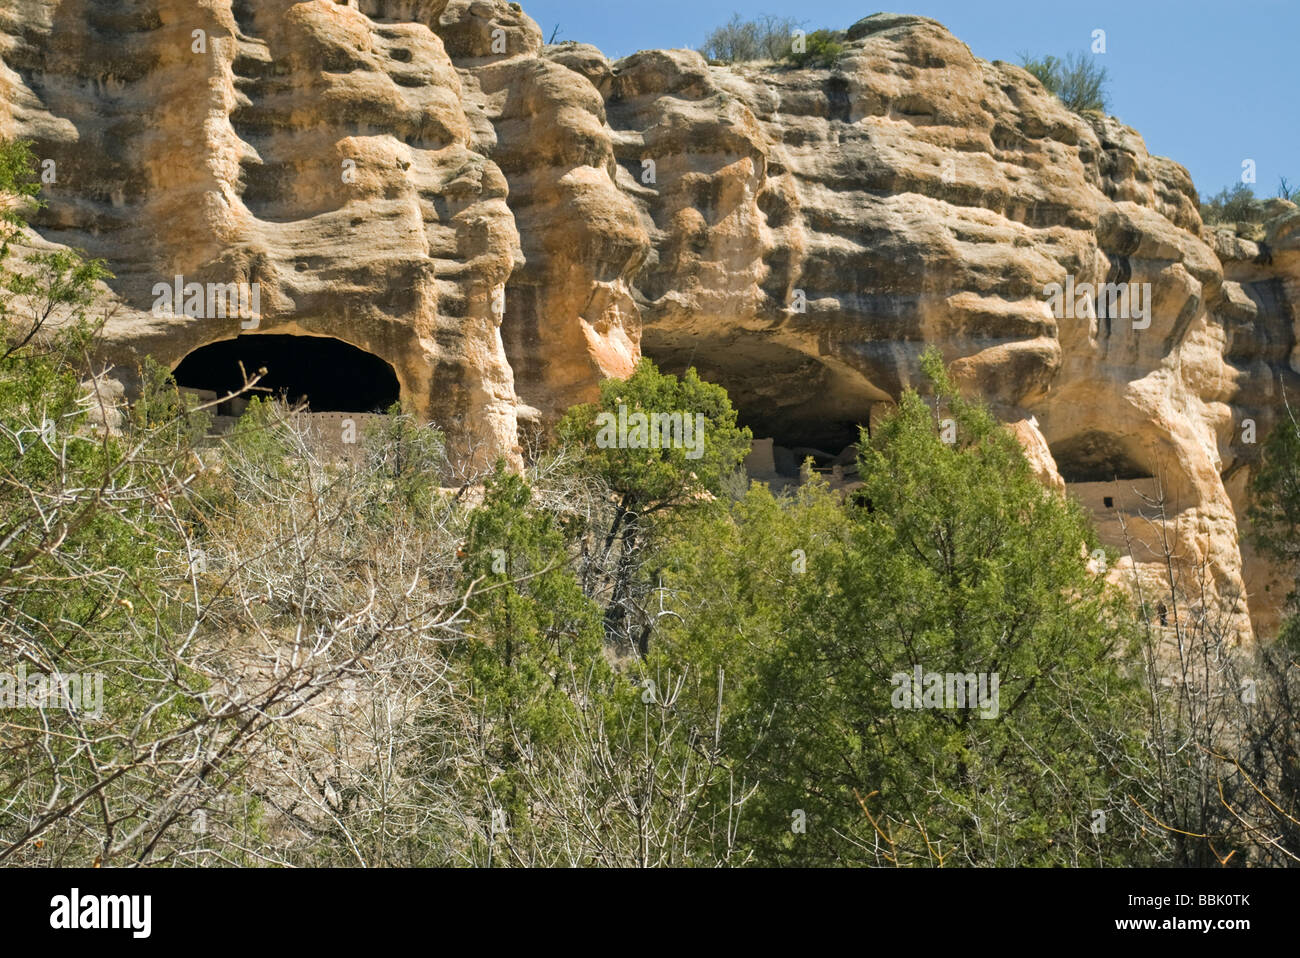 USA New Mexico Gila Cliff Dwellings National Monument Cliff dwelling structures in natural caves in cliff face Stock Photo